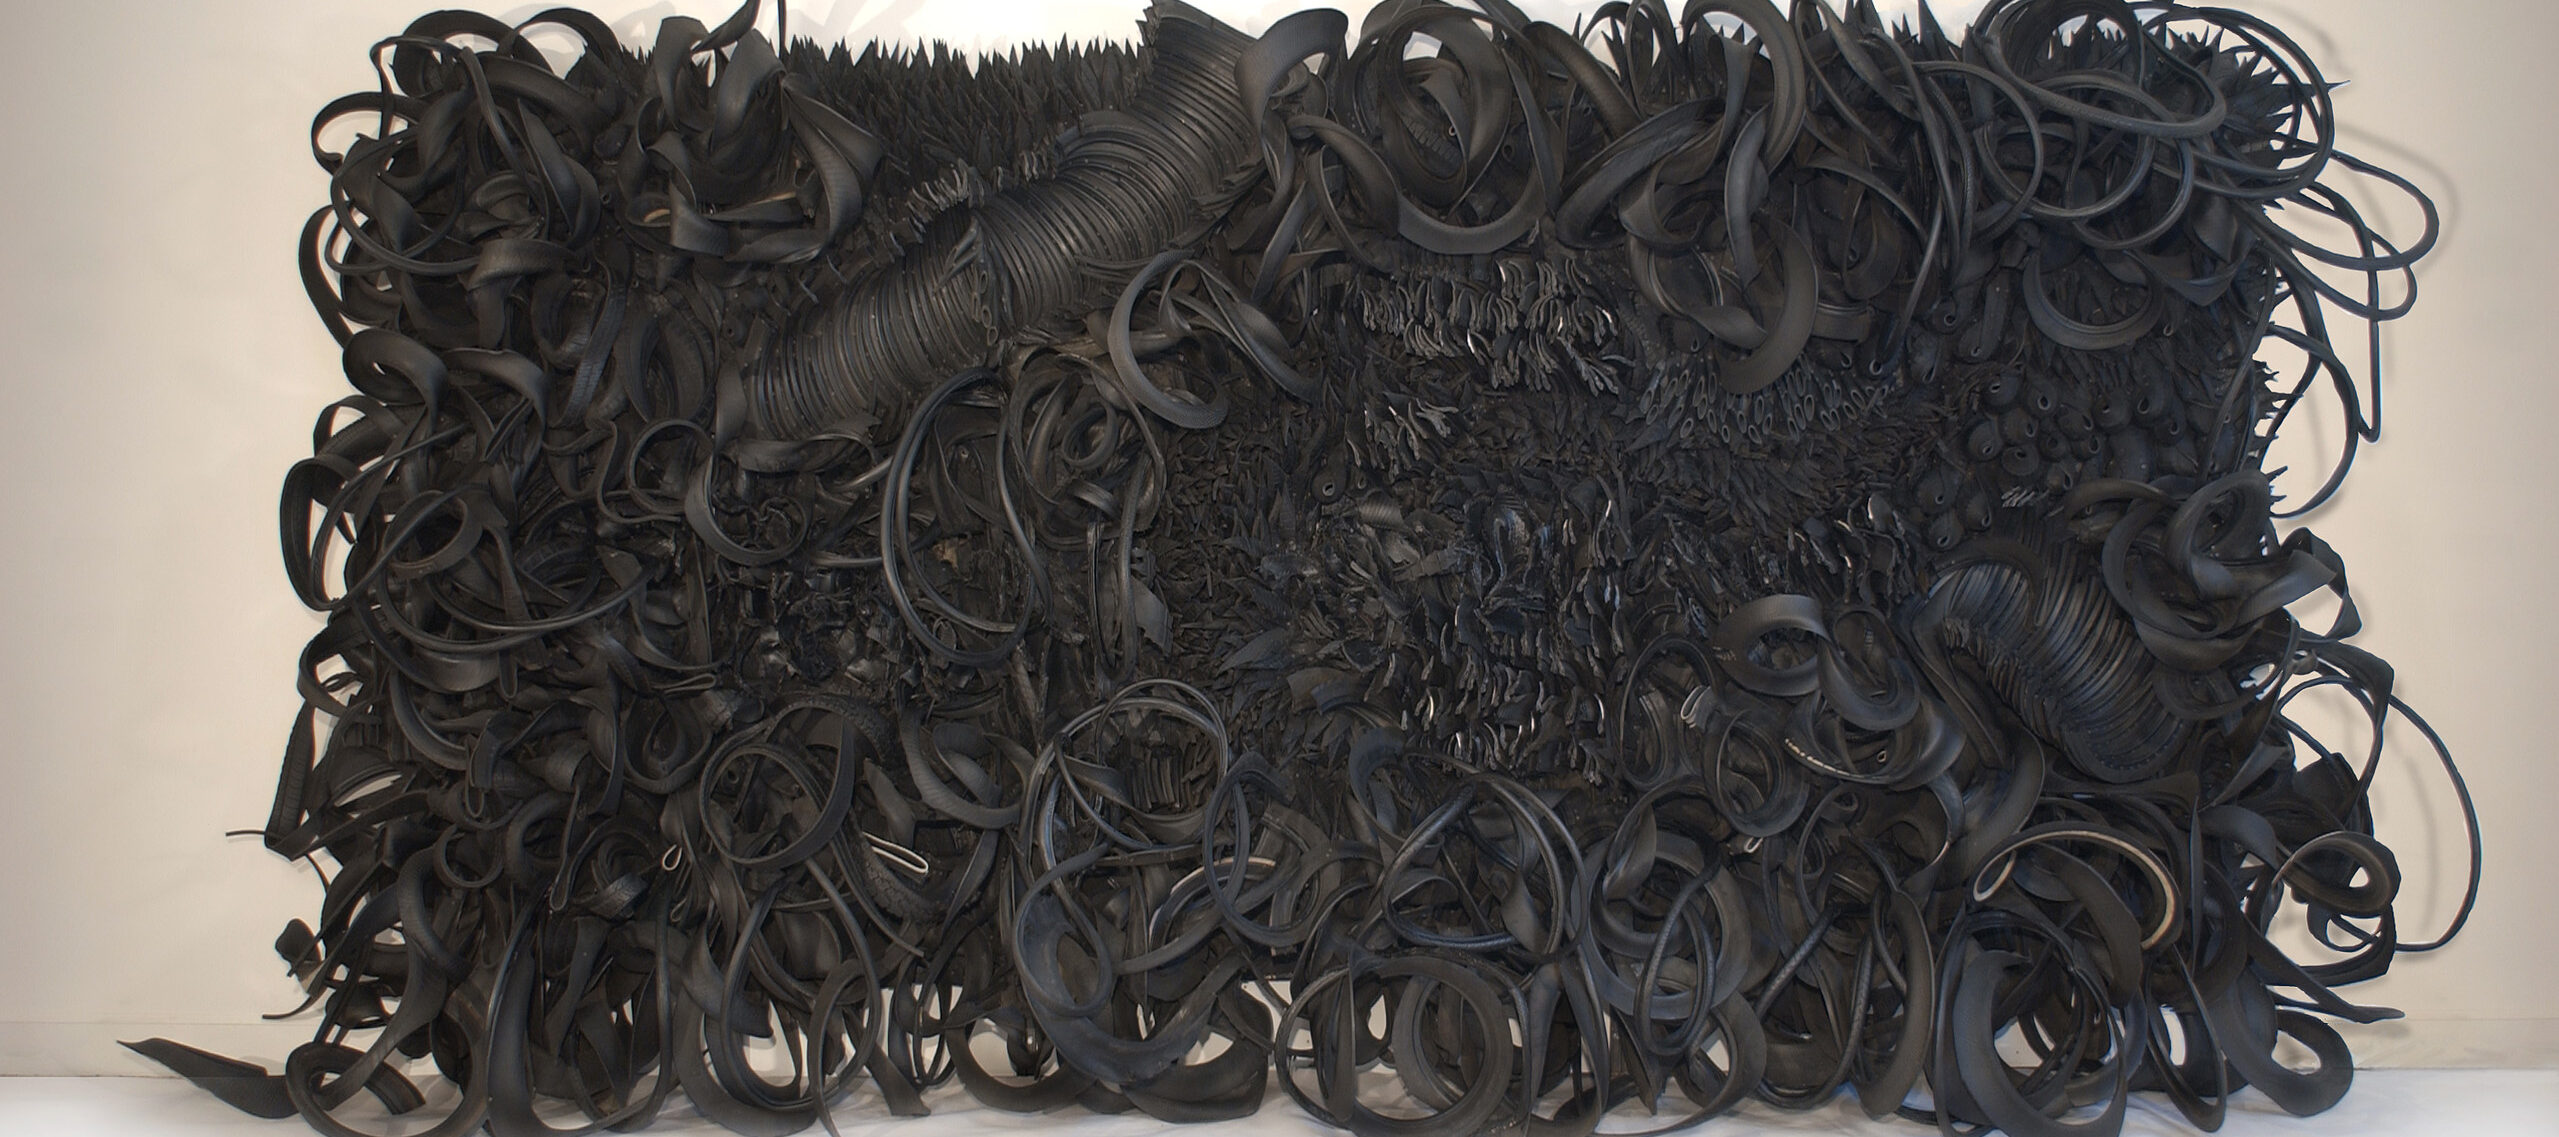 The wall-sized, horizontal sculpture consists of black rubber tires and tubing that has been sliced, stripped, woven, looped, twisted and otherwise manipulated into an expressive and abstract high-relief tableau.